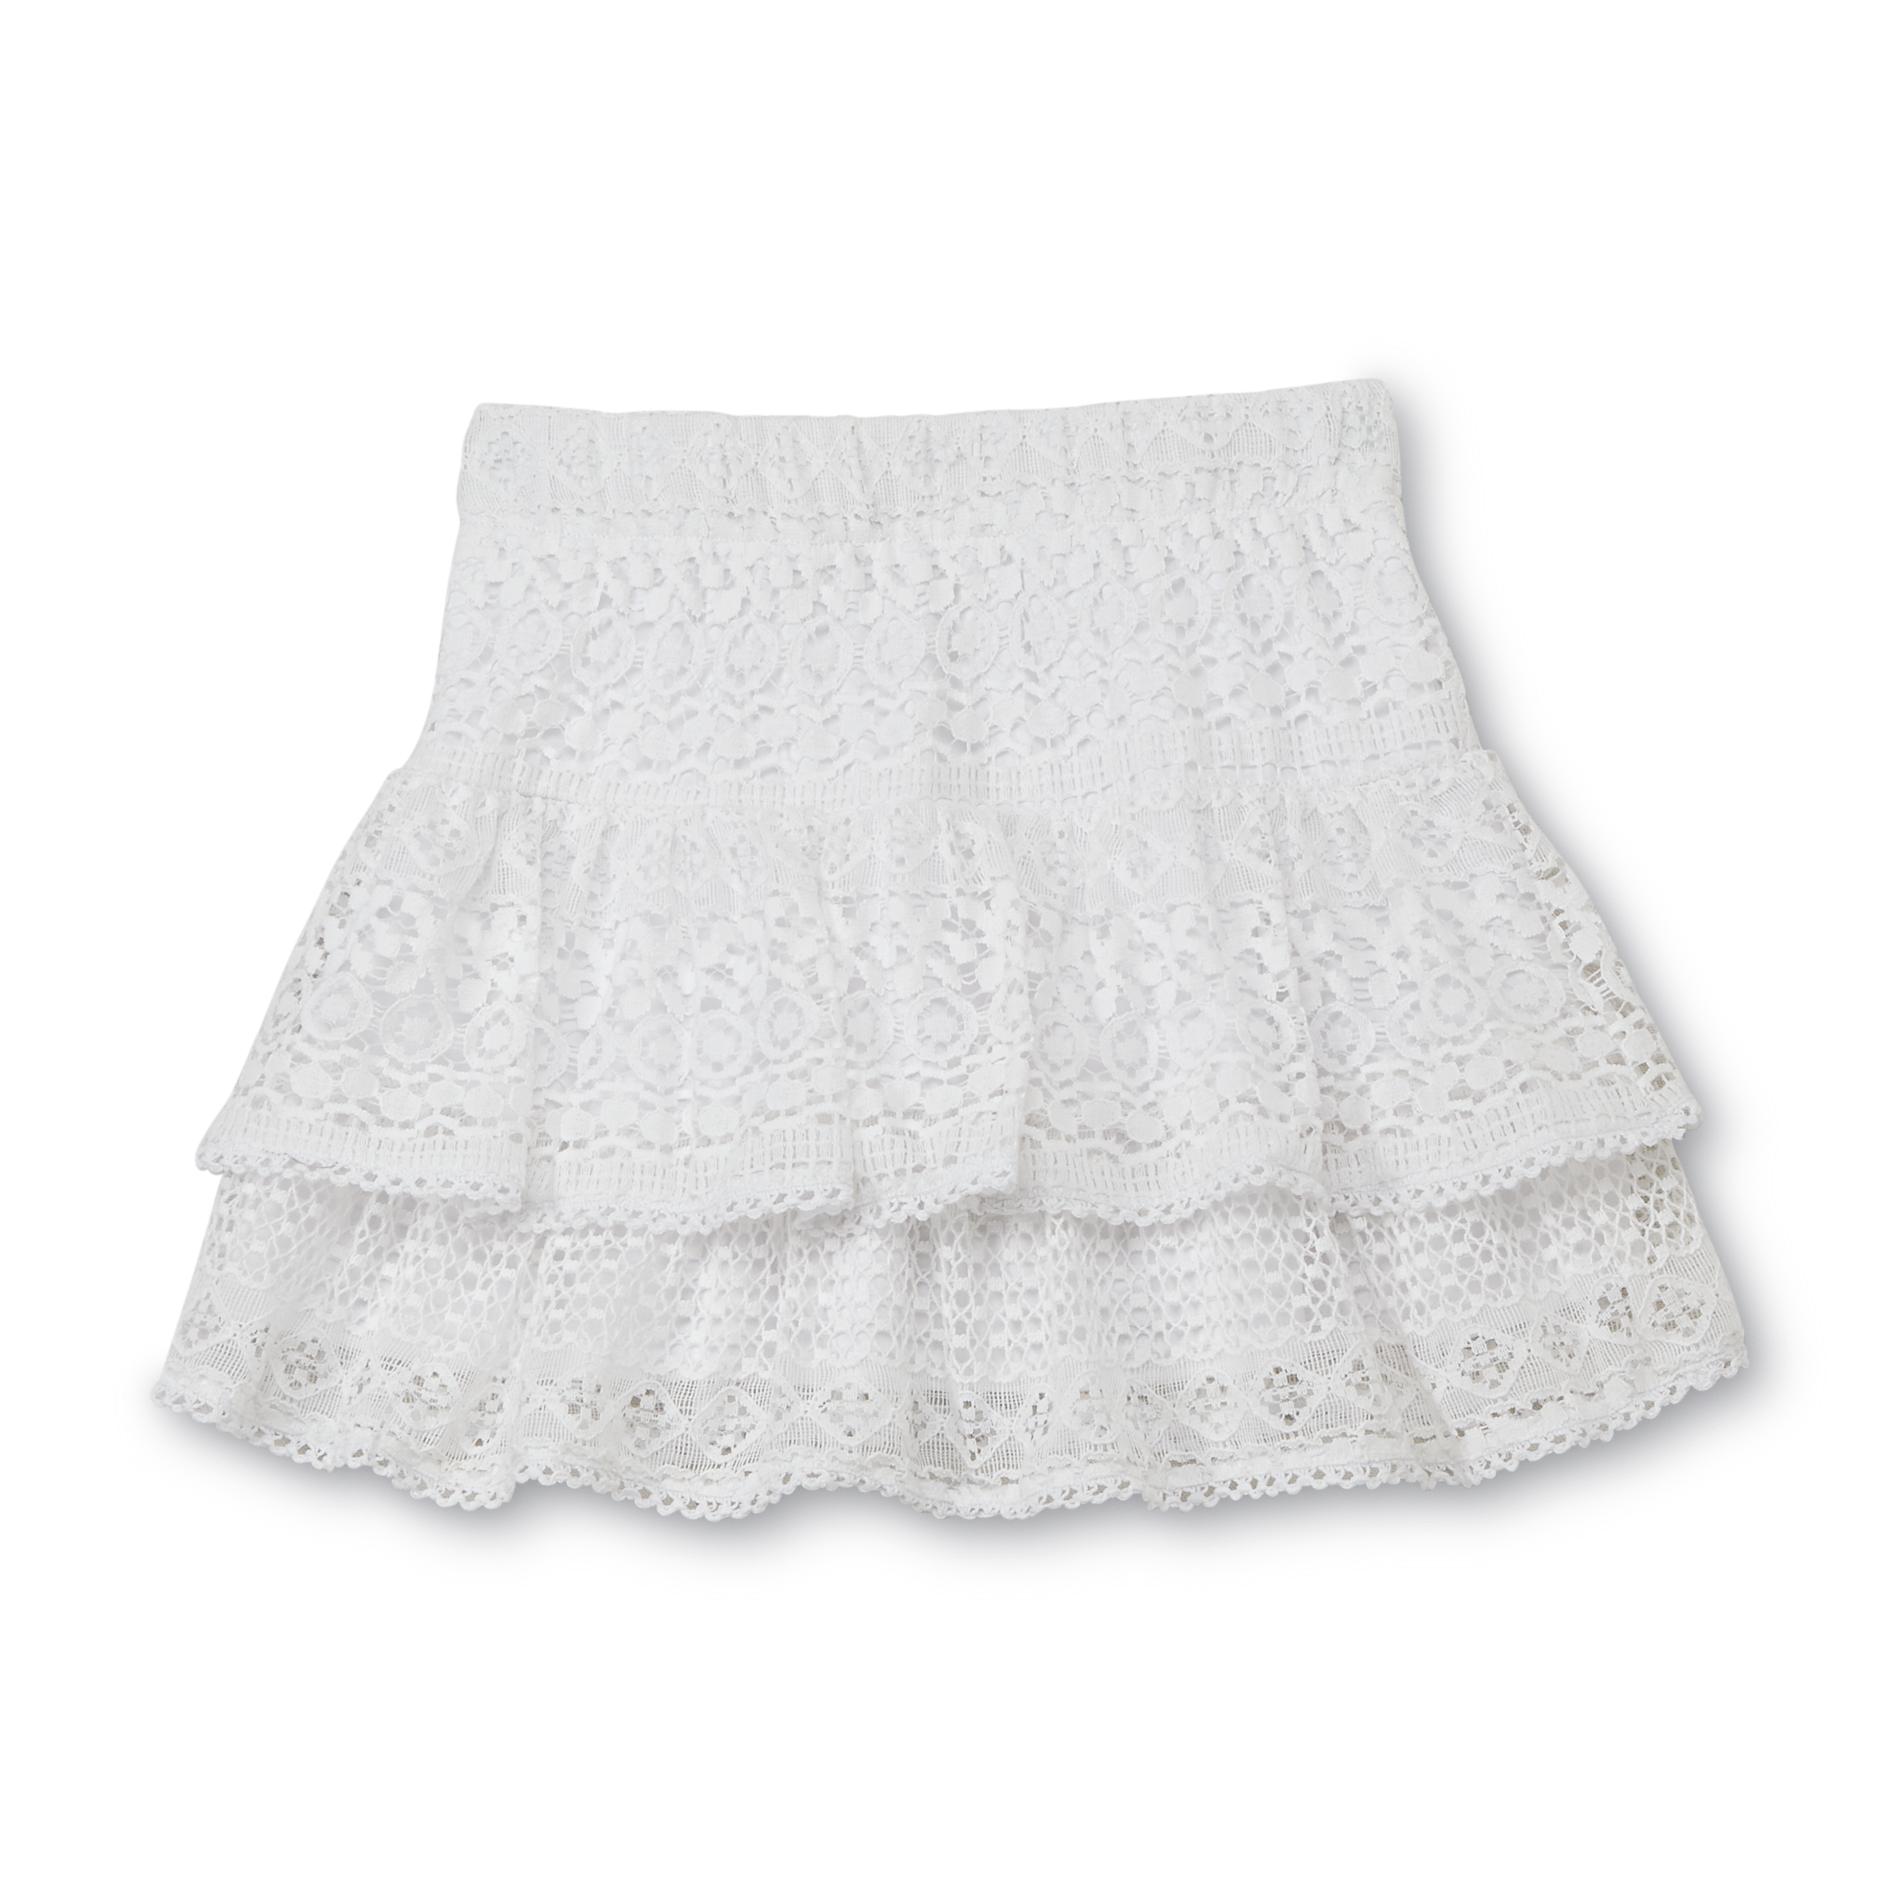 Route 66 Girl's Lace Skirted Shorts